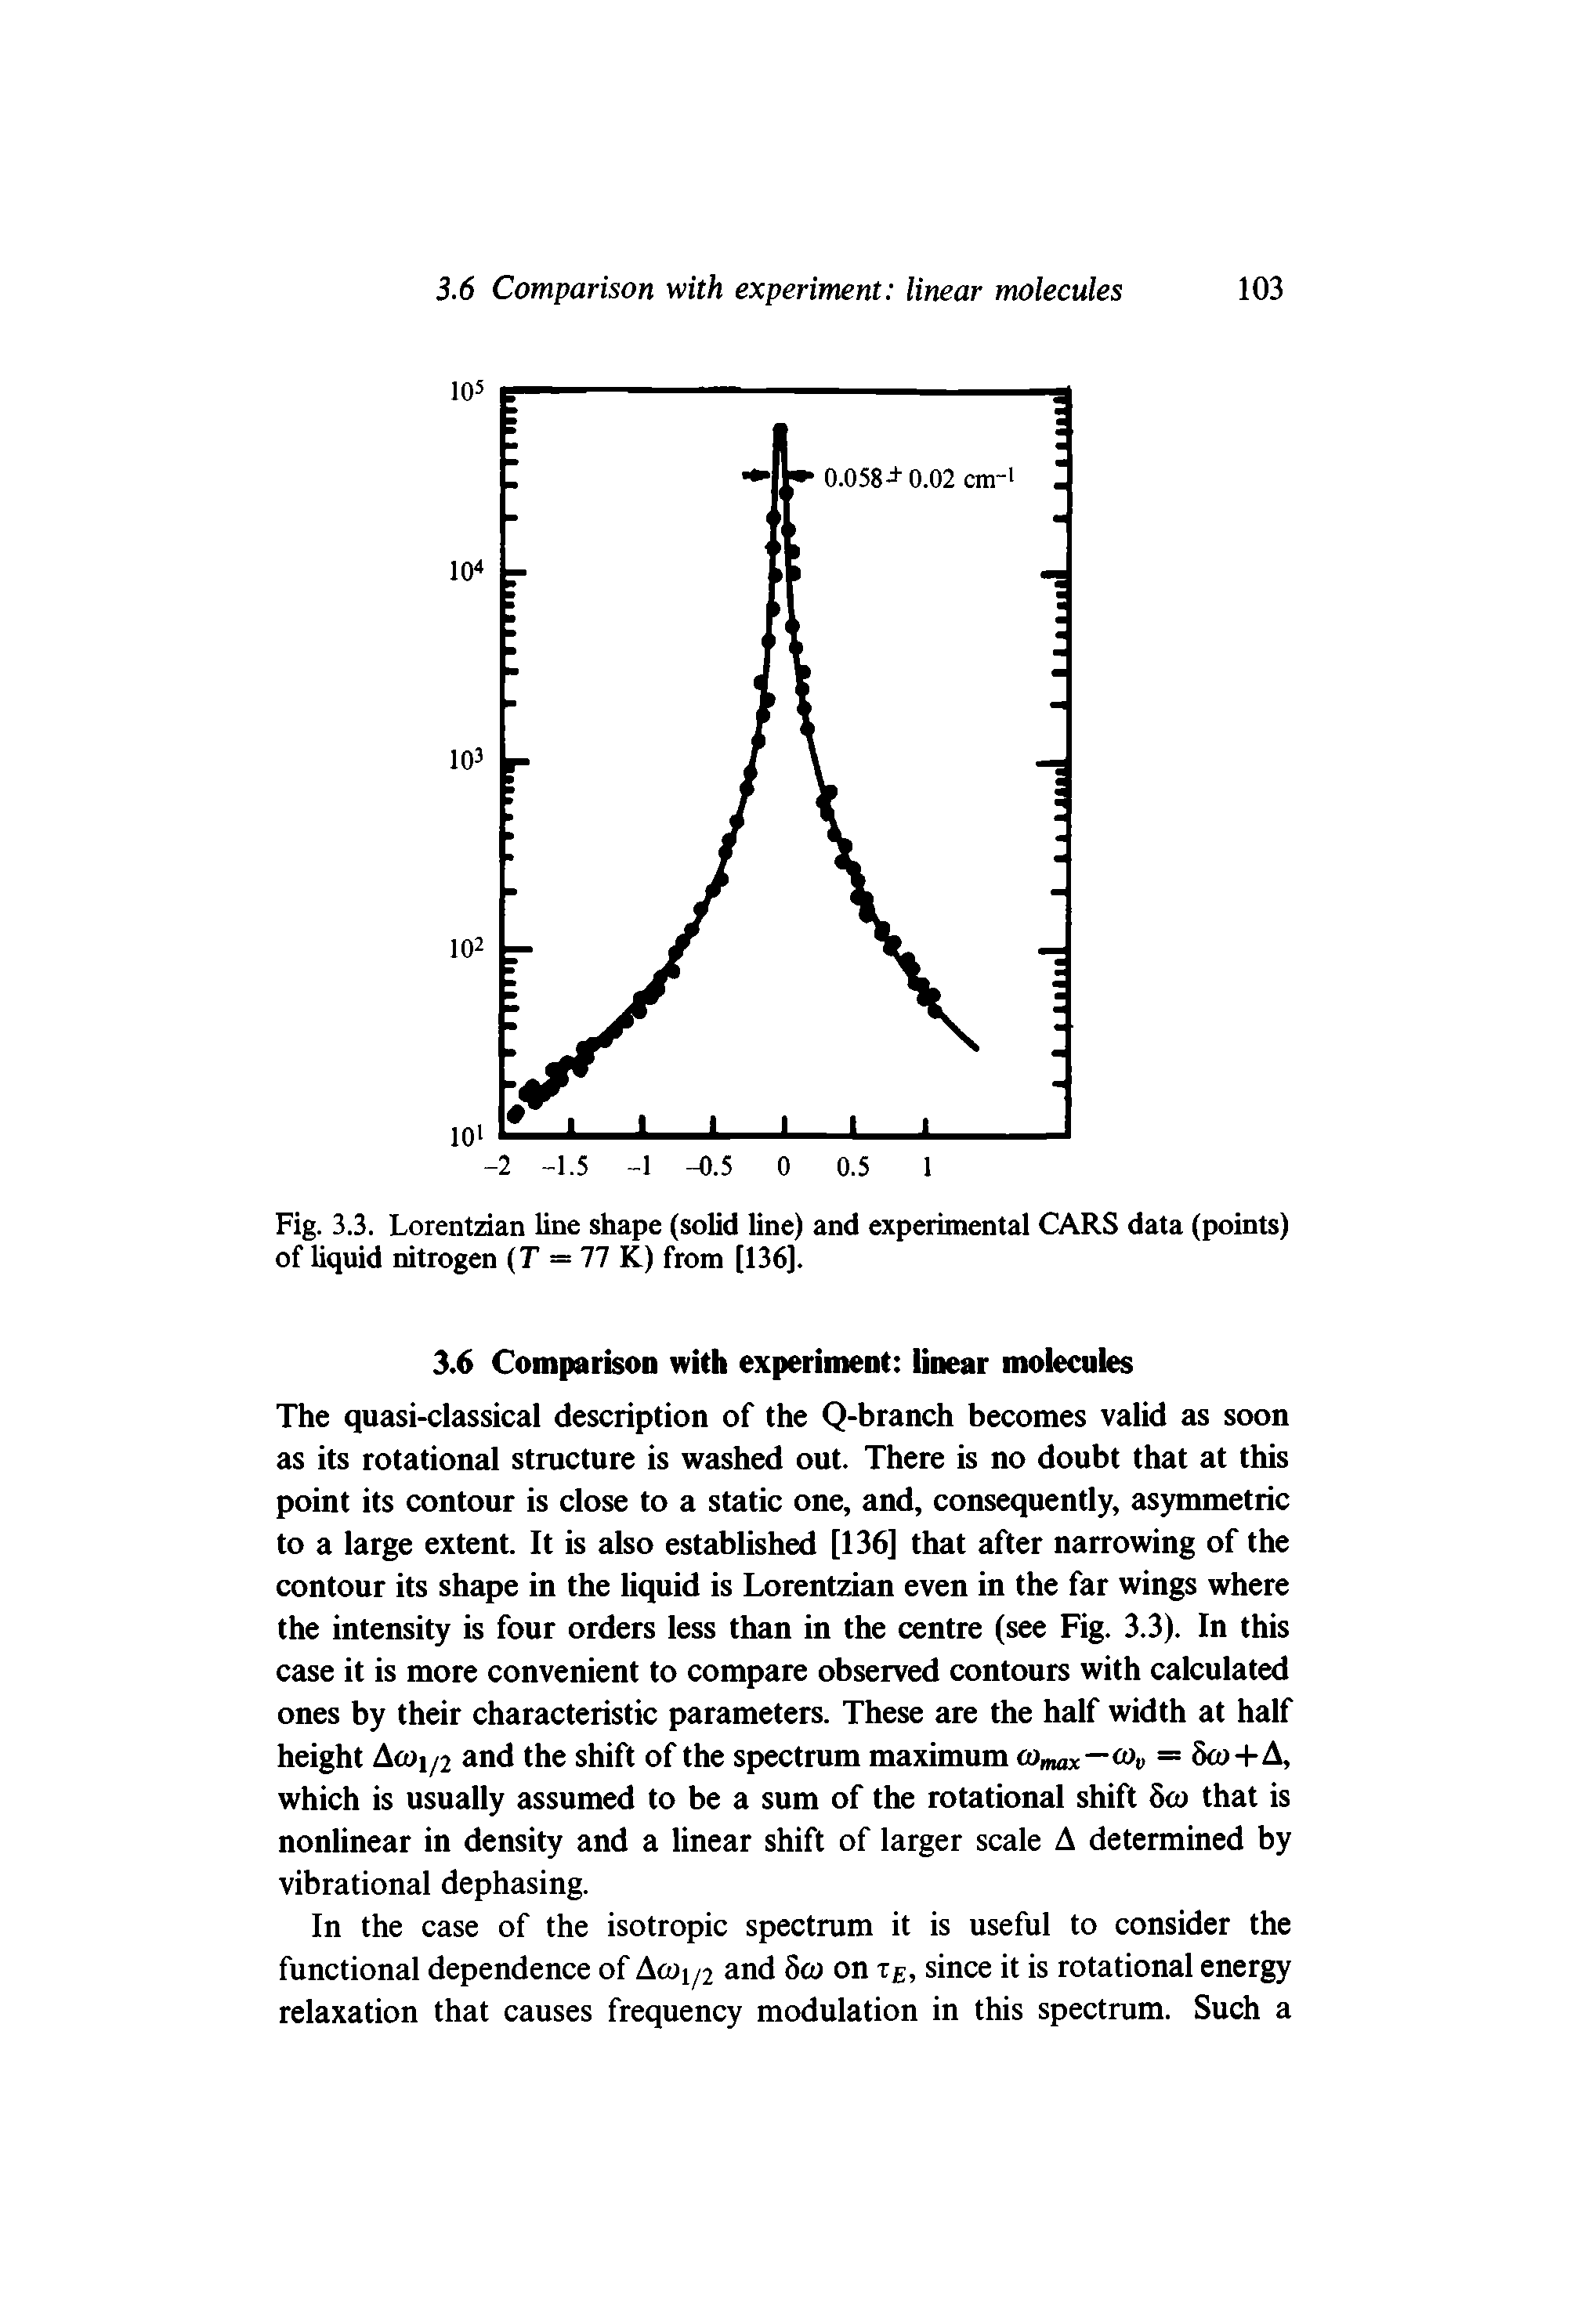 Fig. 3.3. Lorentzian line shape (solid line) and experimental CARS data (points) of liquid nitrogen (T — 77 K) from [136].